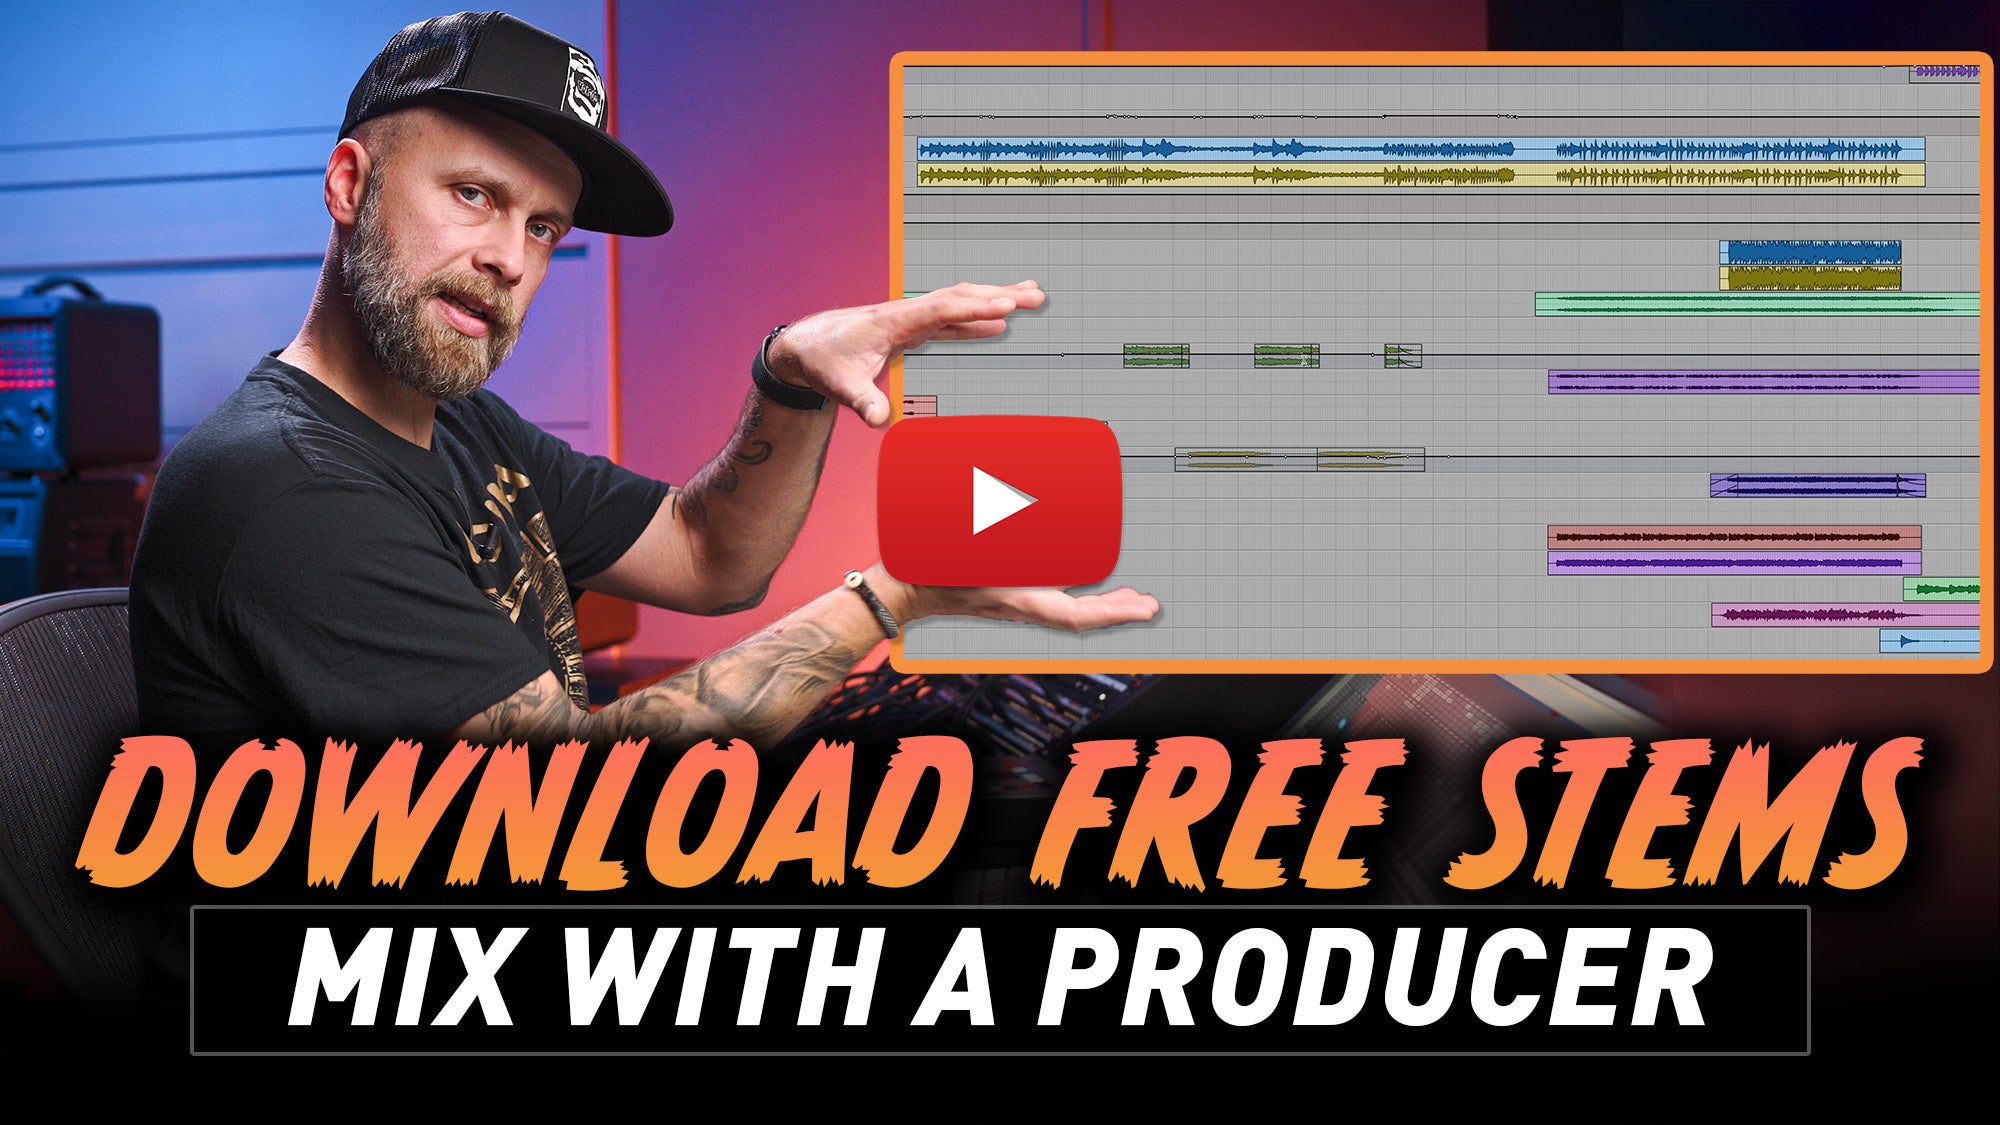 Download stems and mix along with producer Jens Bogren